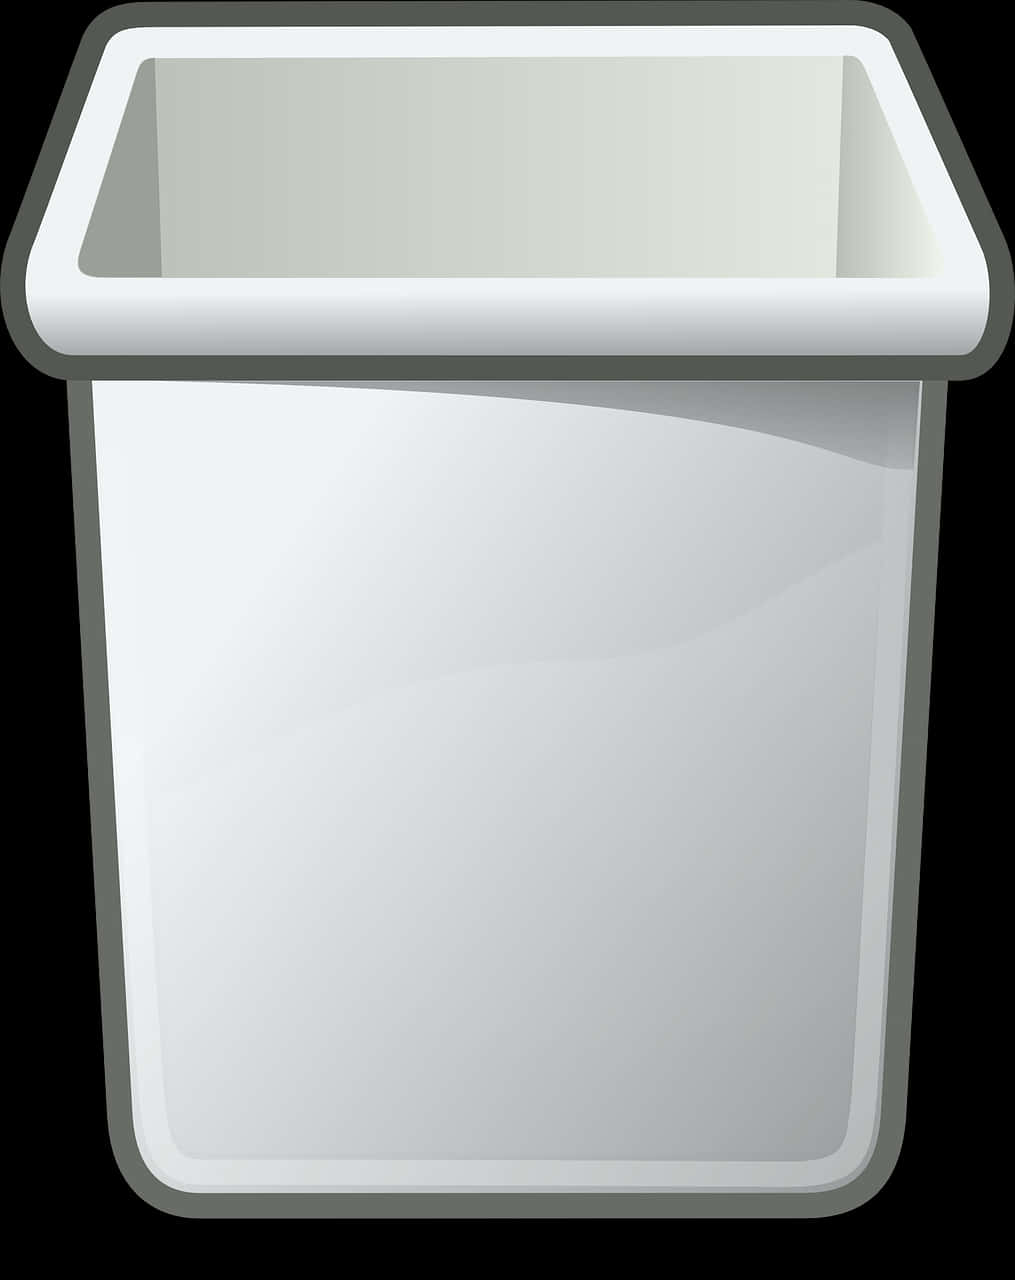 A White Trash Can With A Black Background